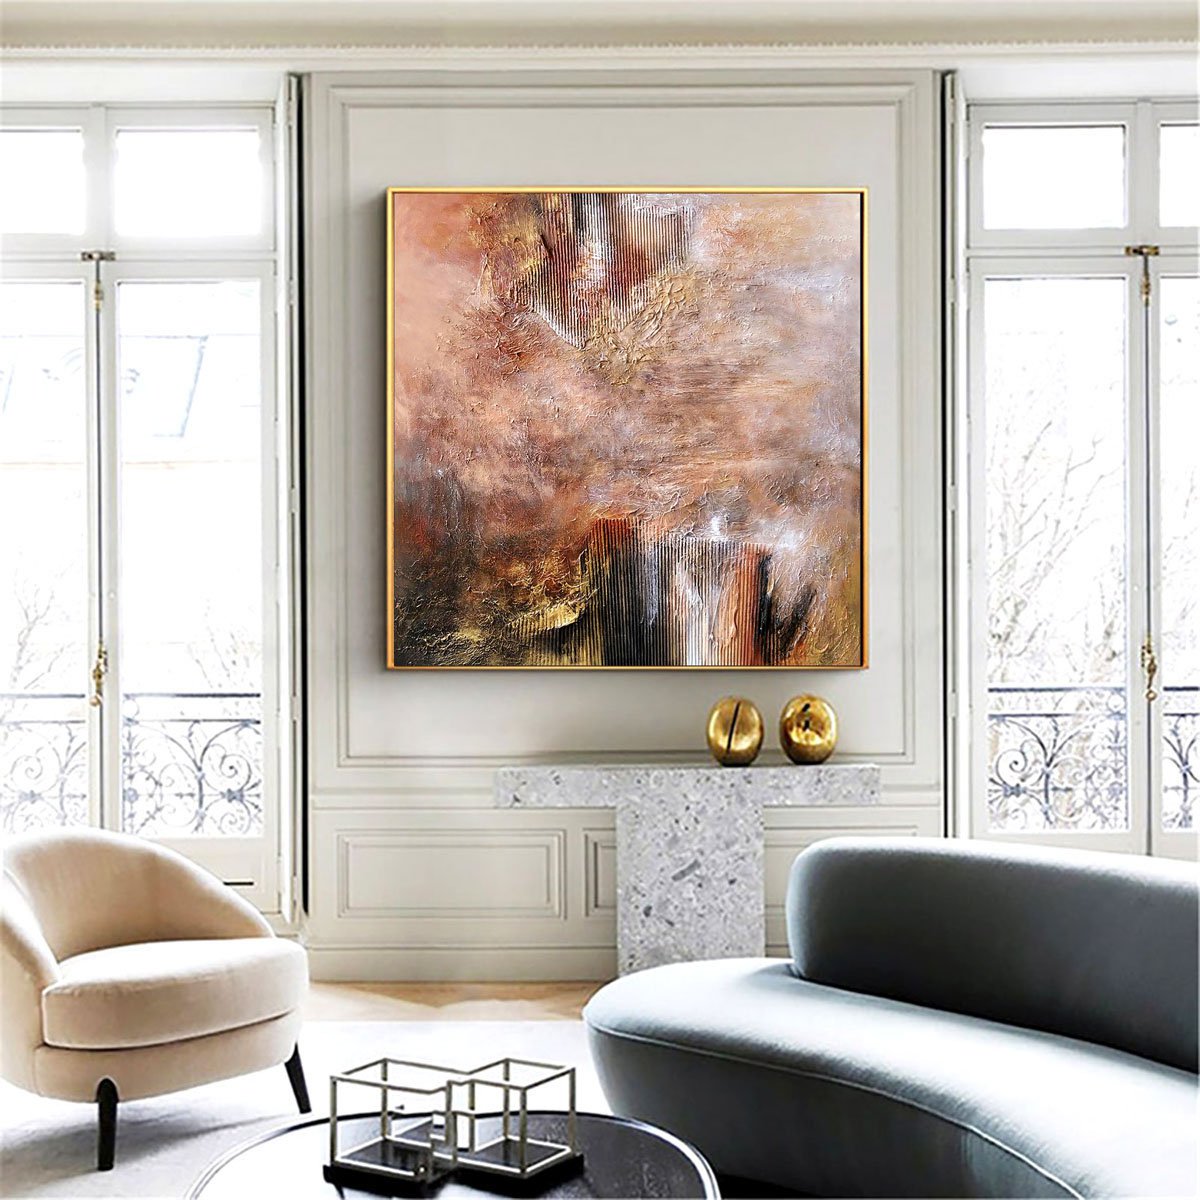 The hidden hills 100x100cm Abstract Textured Painting by Alexandra Petropoulou